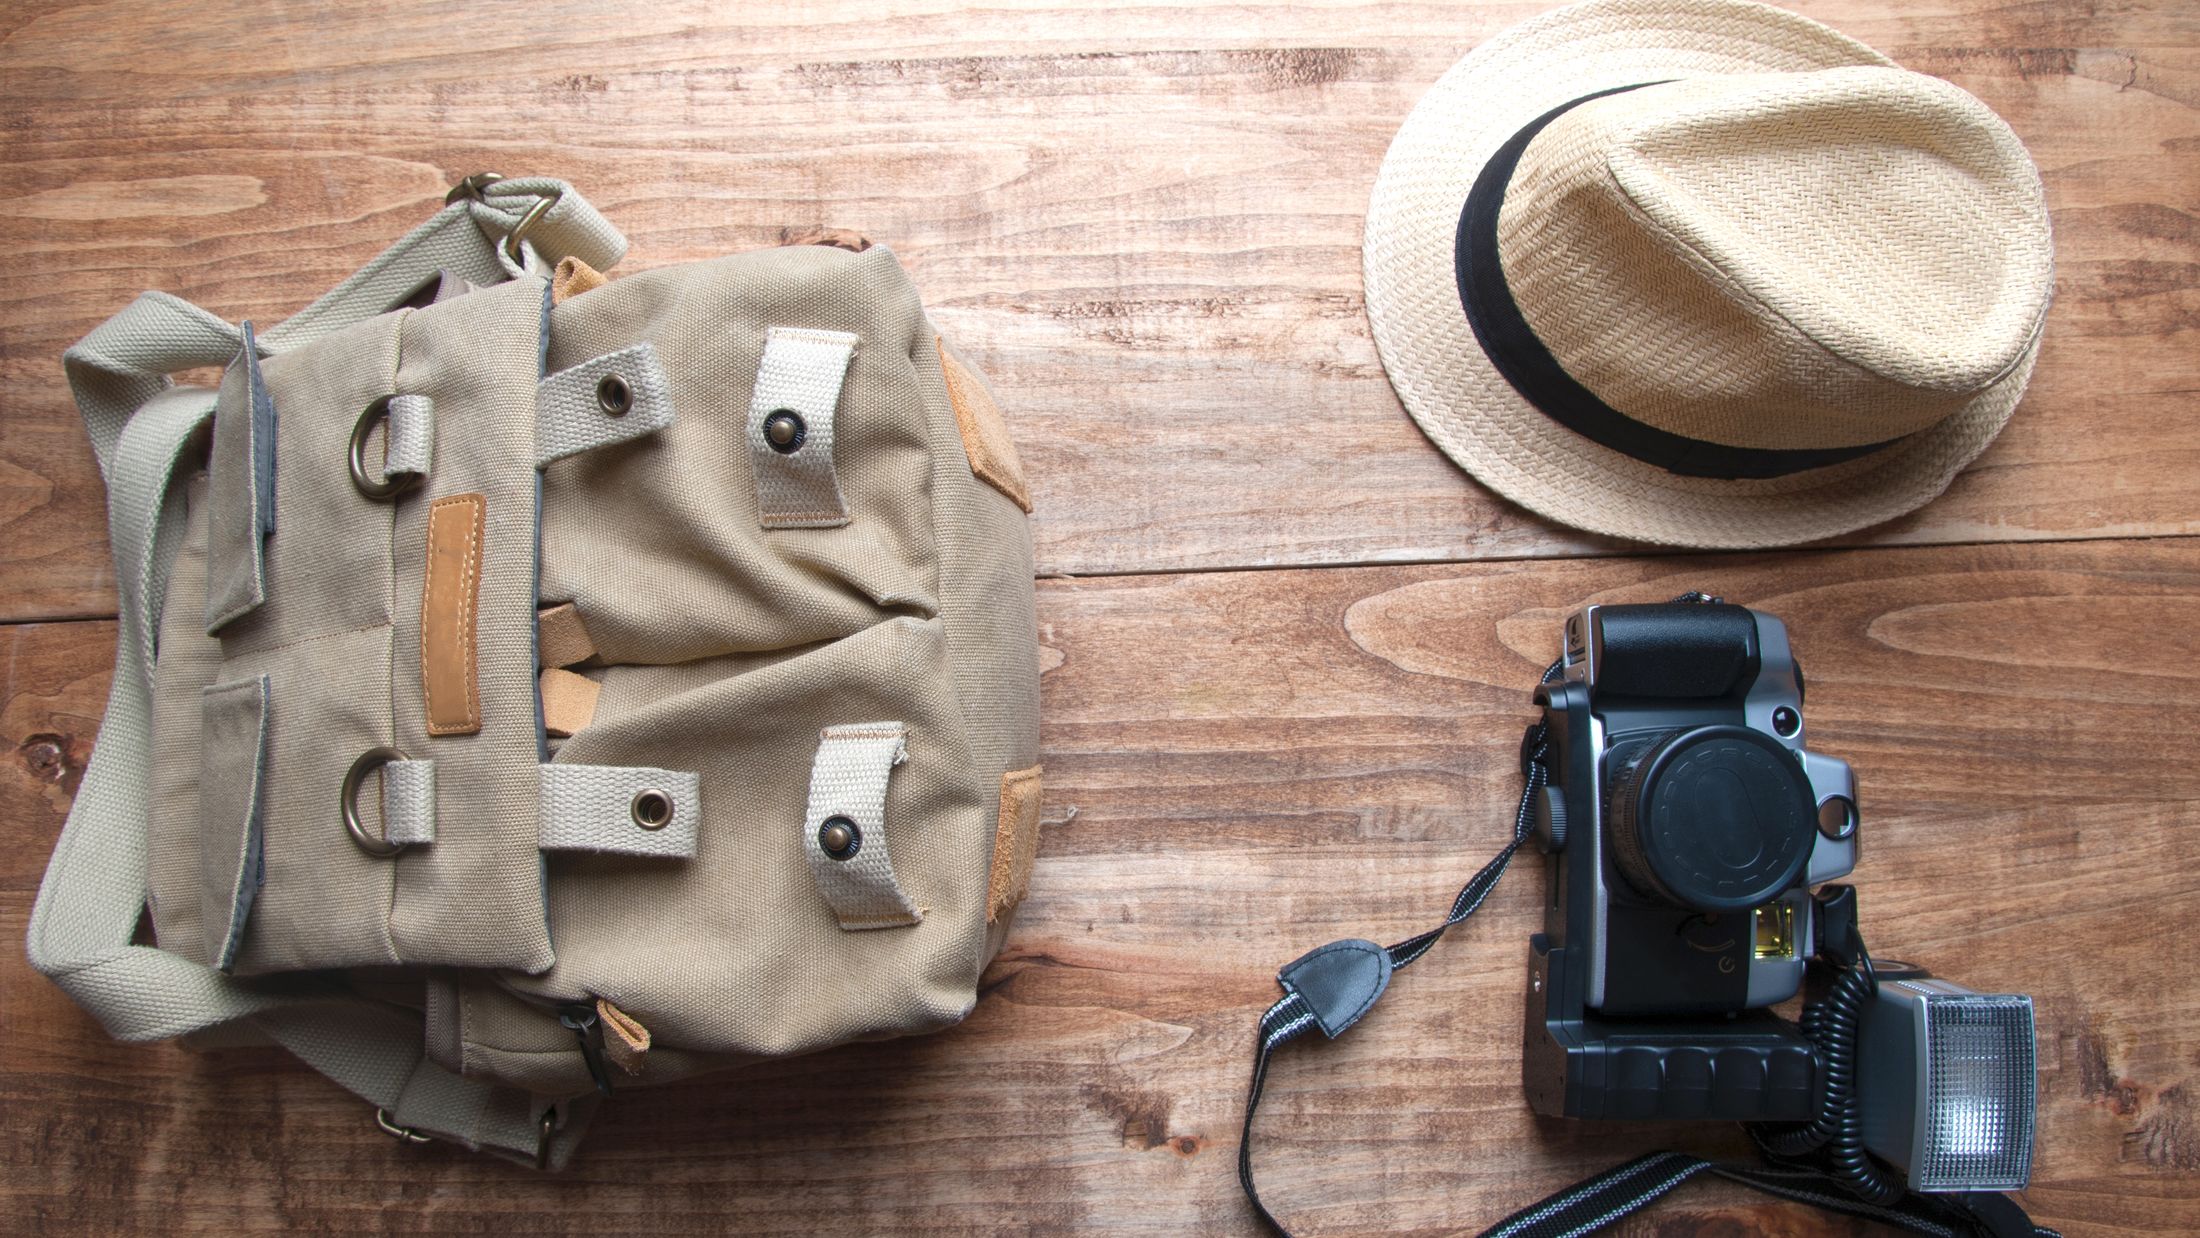 Tourism concept. Backpack, hat , binocular and old camera isolated on wooden background.; Shutterstock ID 437880175; PO: Project Italy - Facilities images; Job: Project Italy - Facilities images; Client: H&J/Citalia